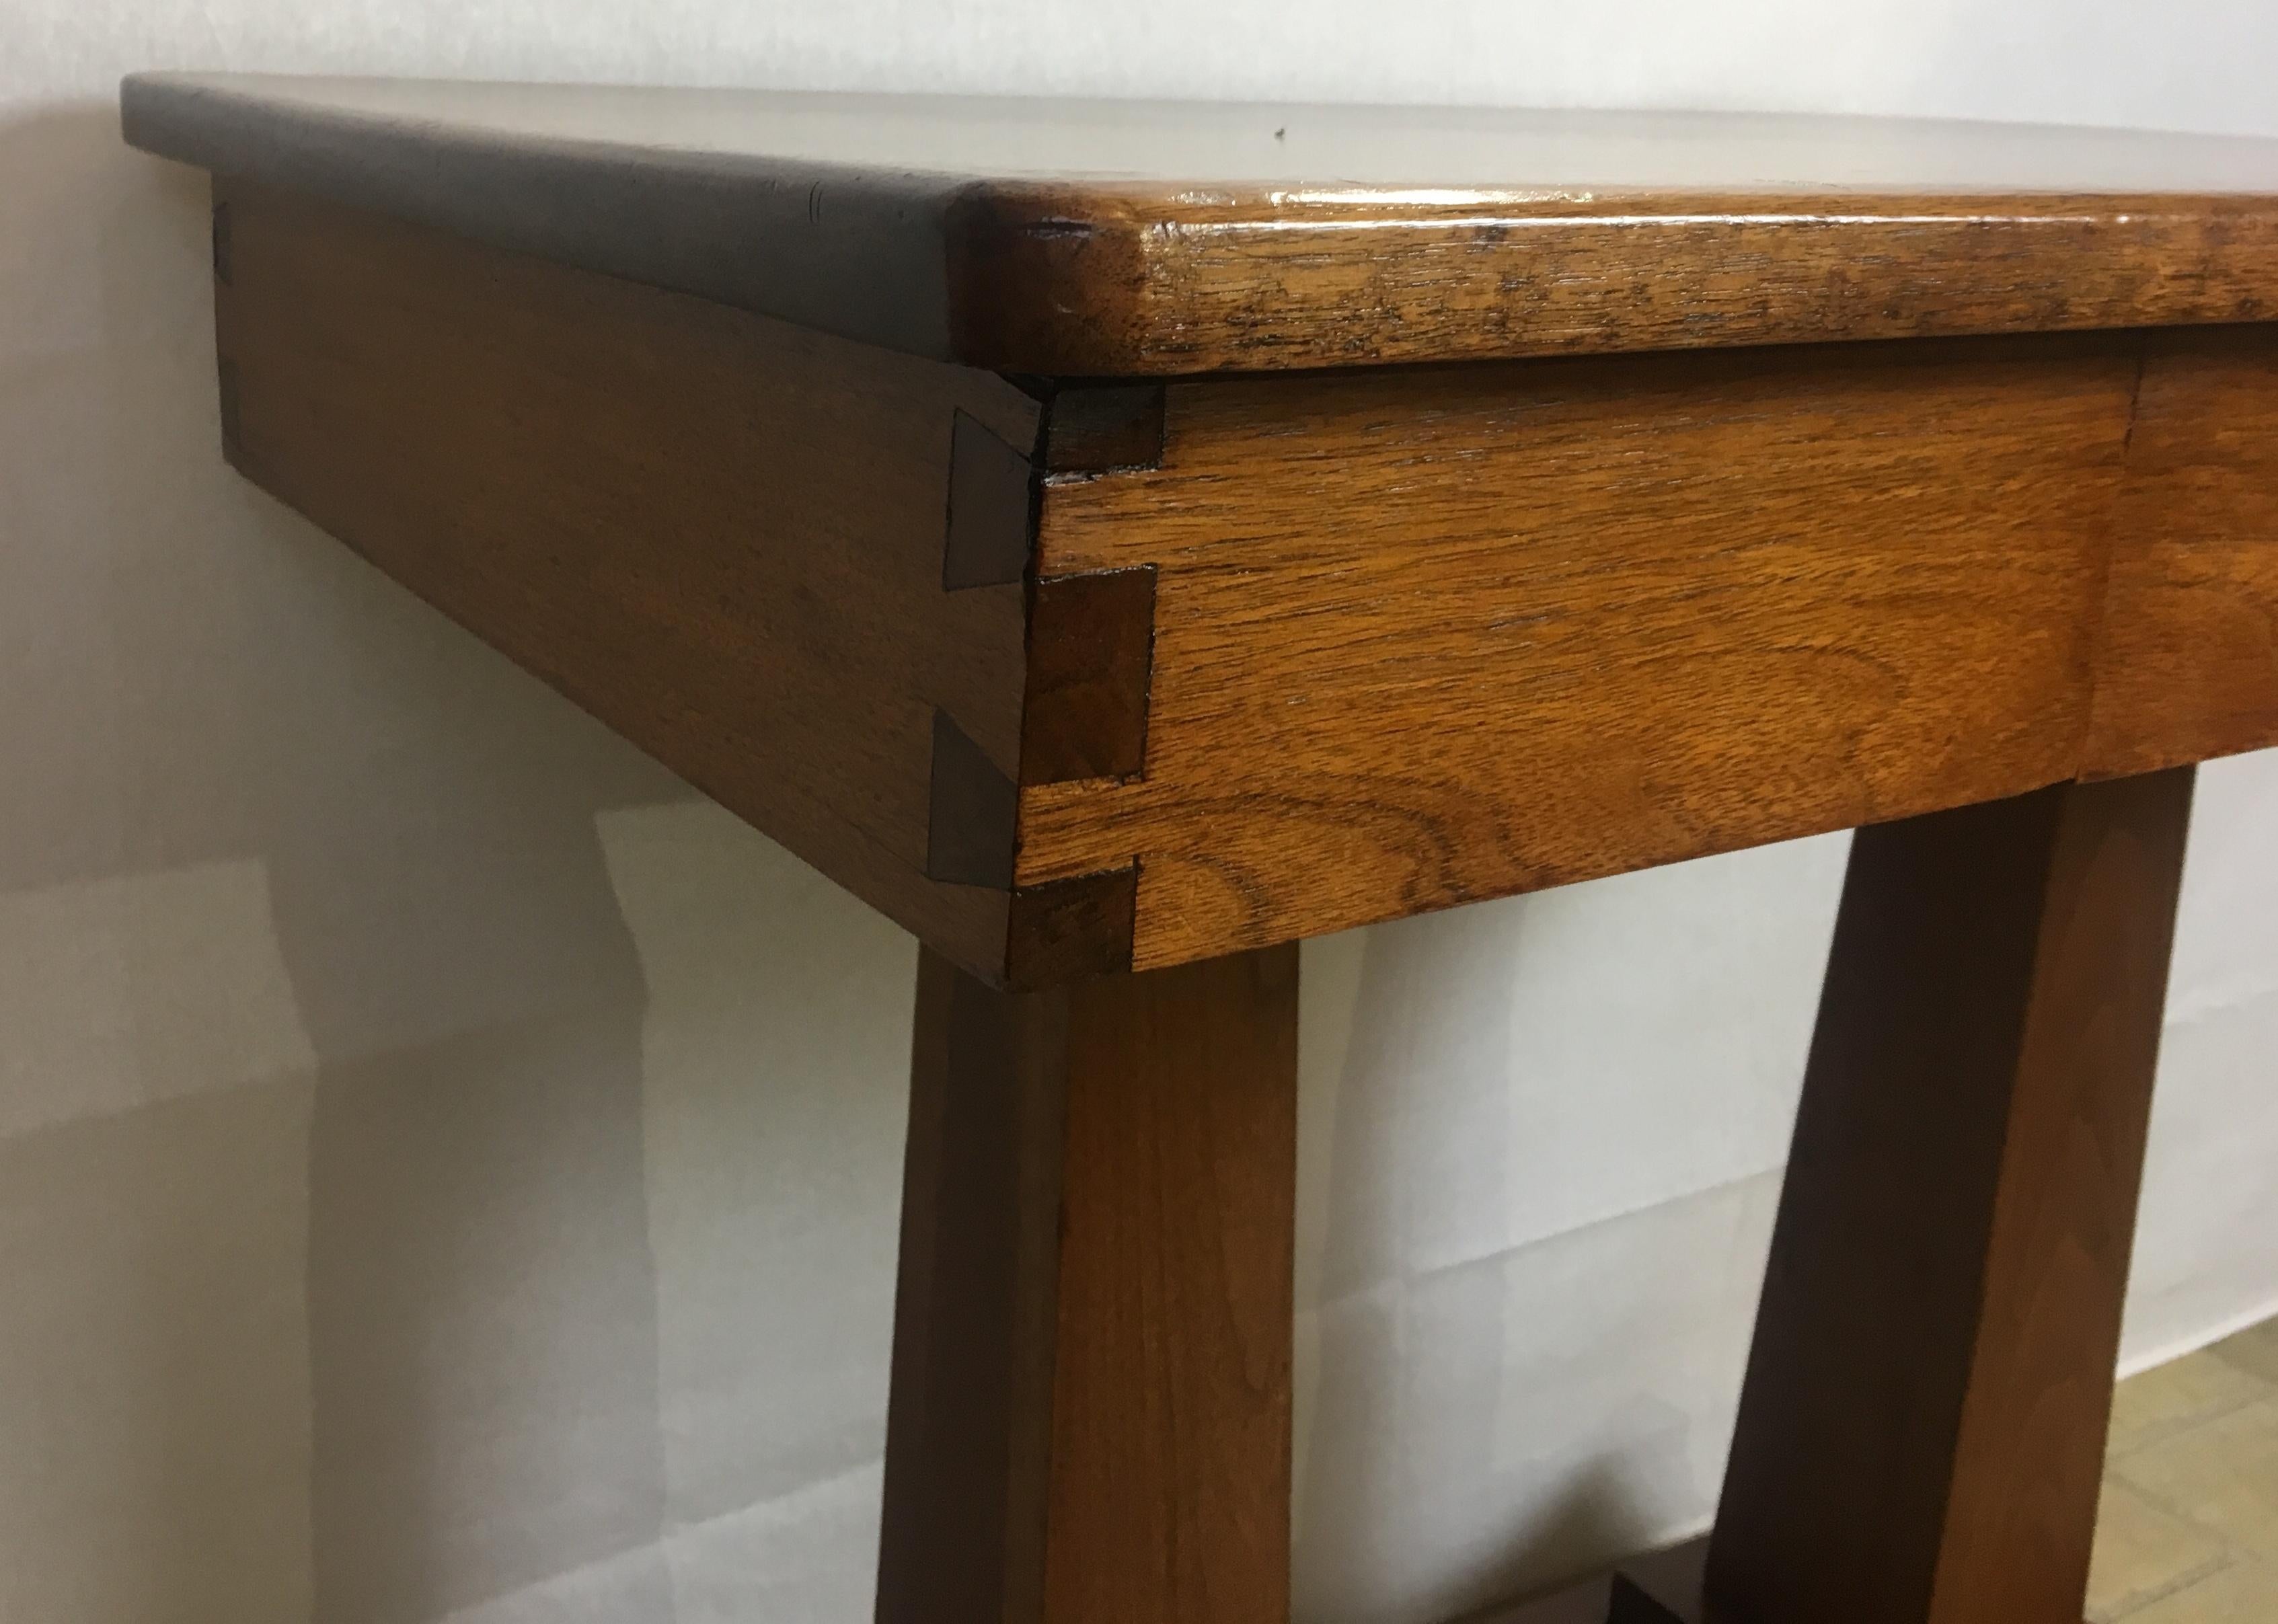 Arts and Crafts American Arts & Crafts Era Mahogany Side Table or Small Desk For Sale